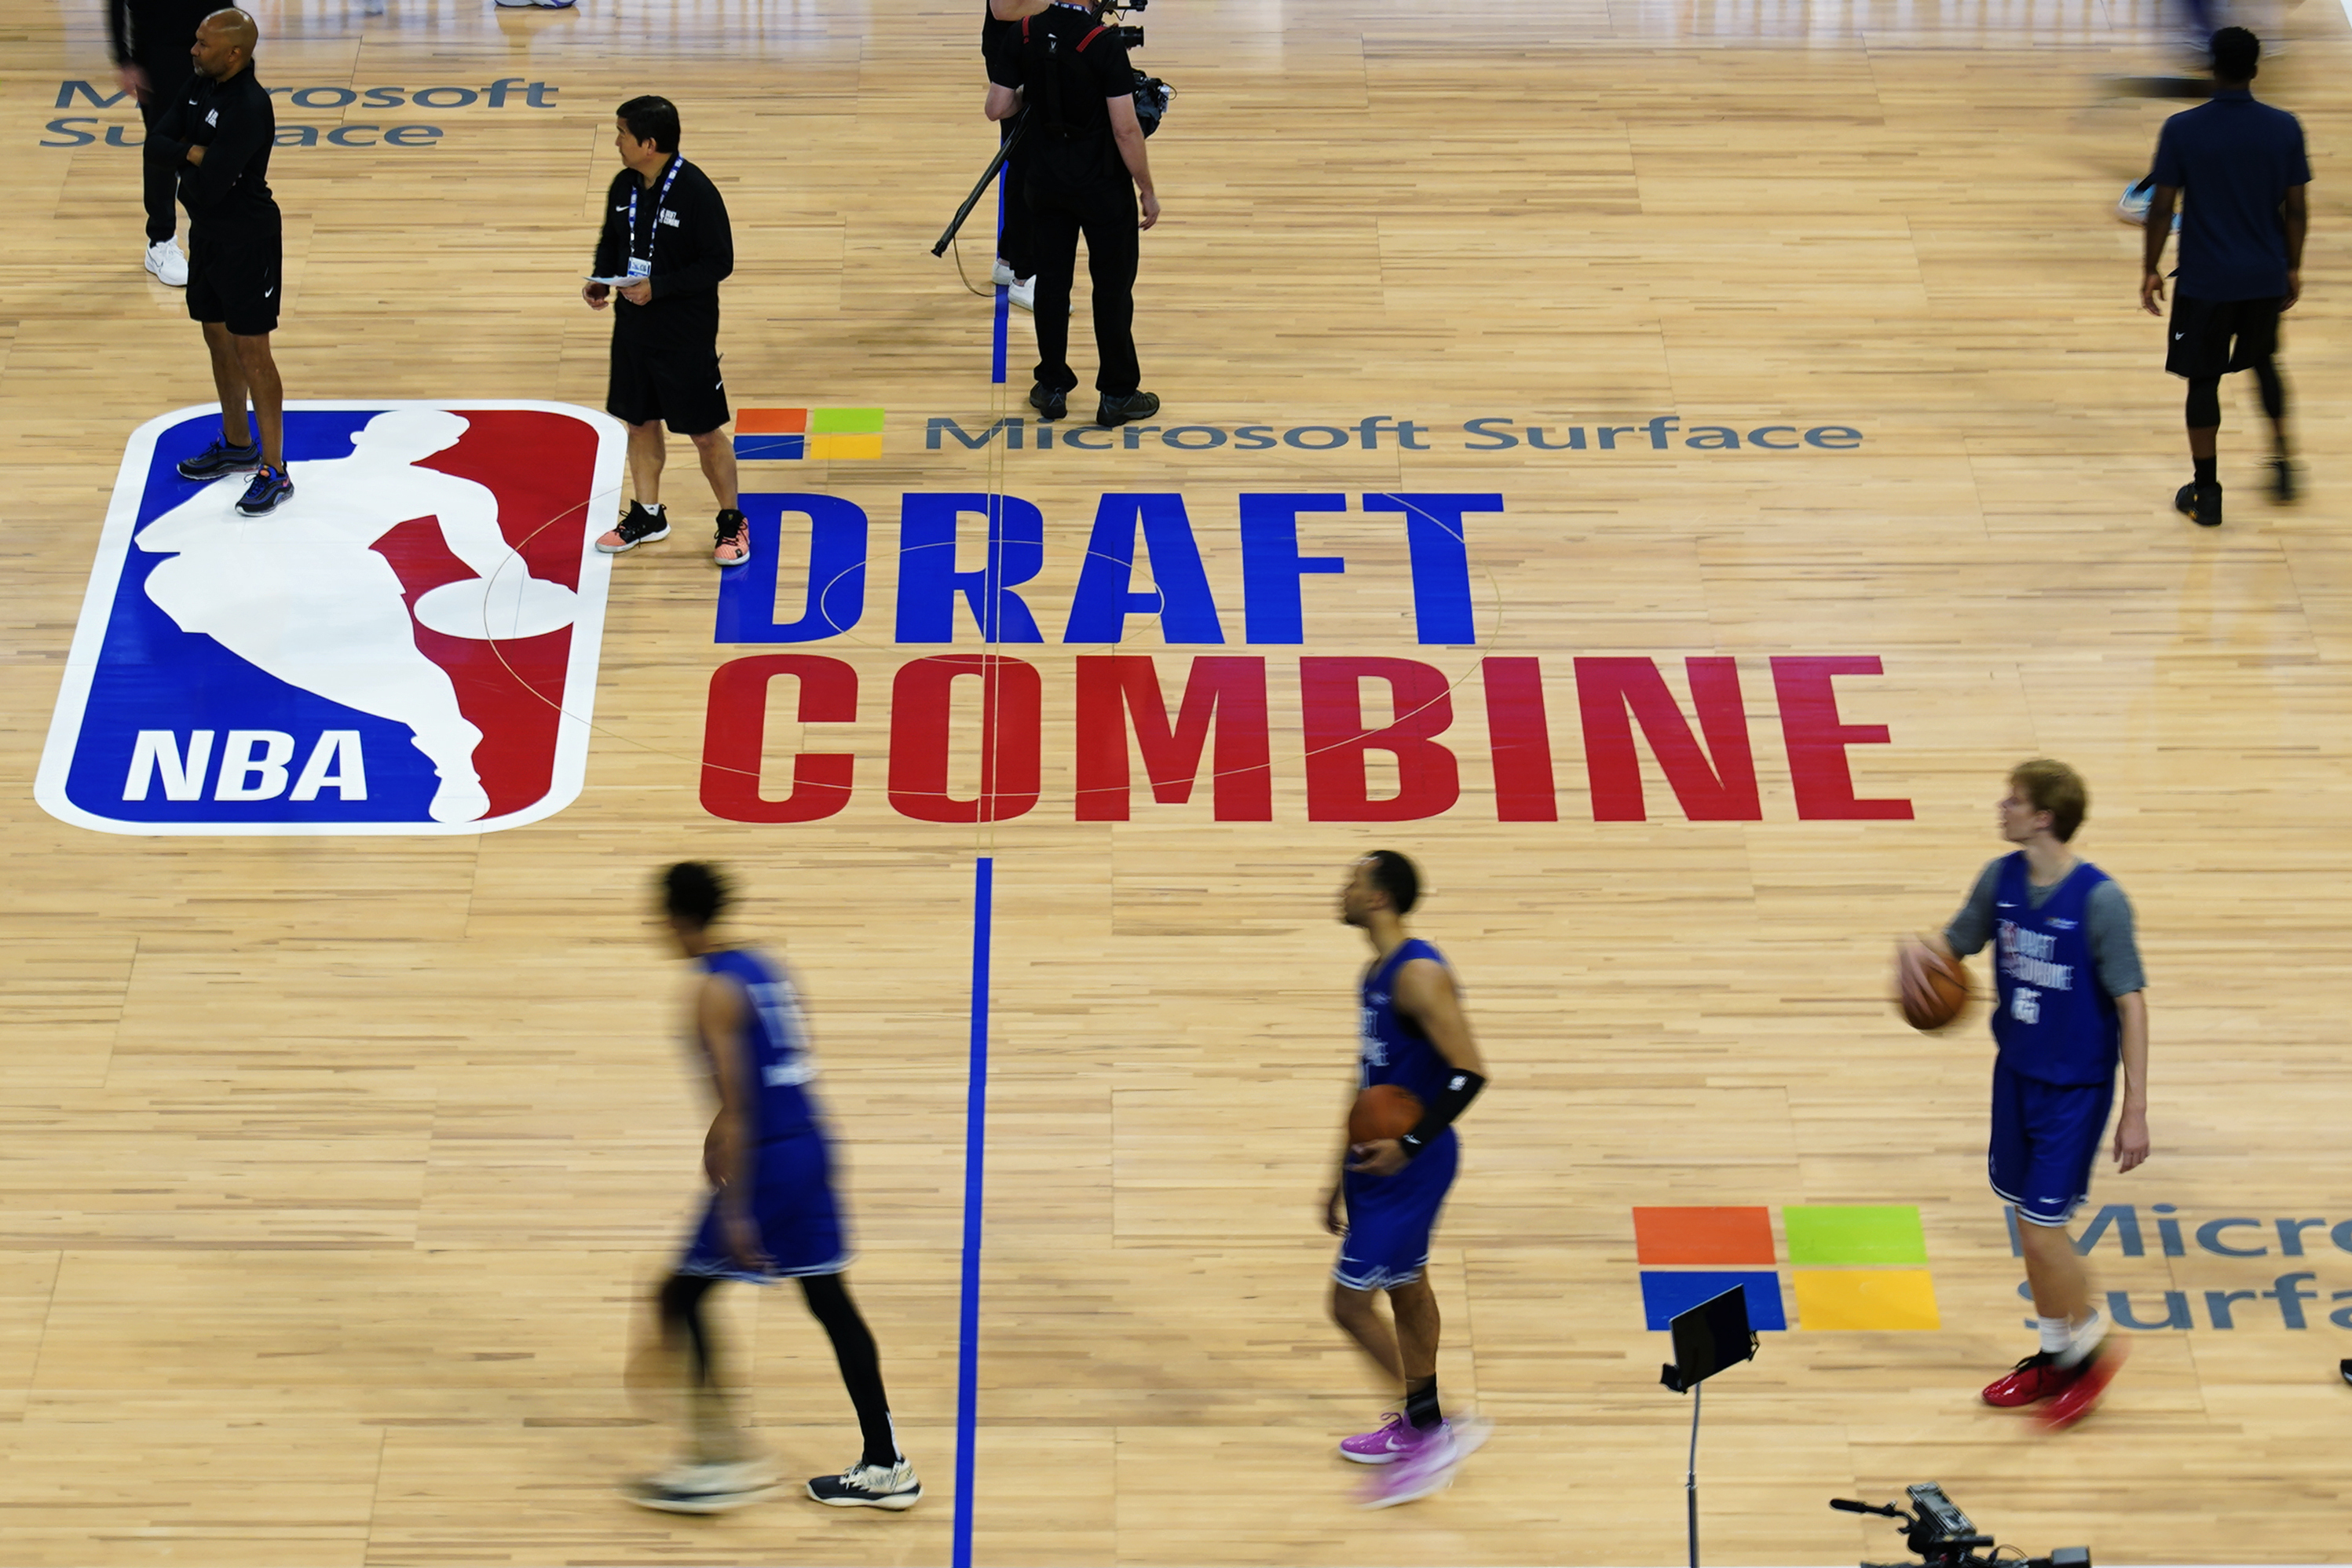 2023 NBA Draft: Who do the mock drafts have the Wizards picking at